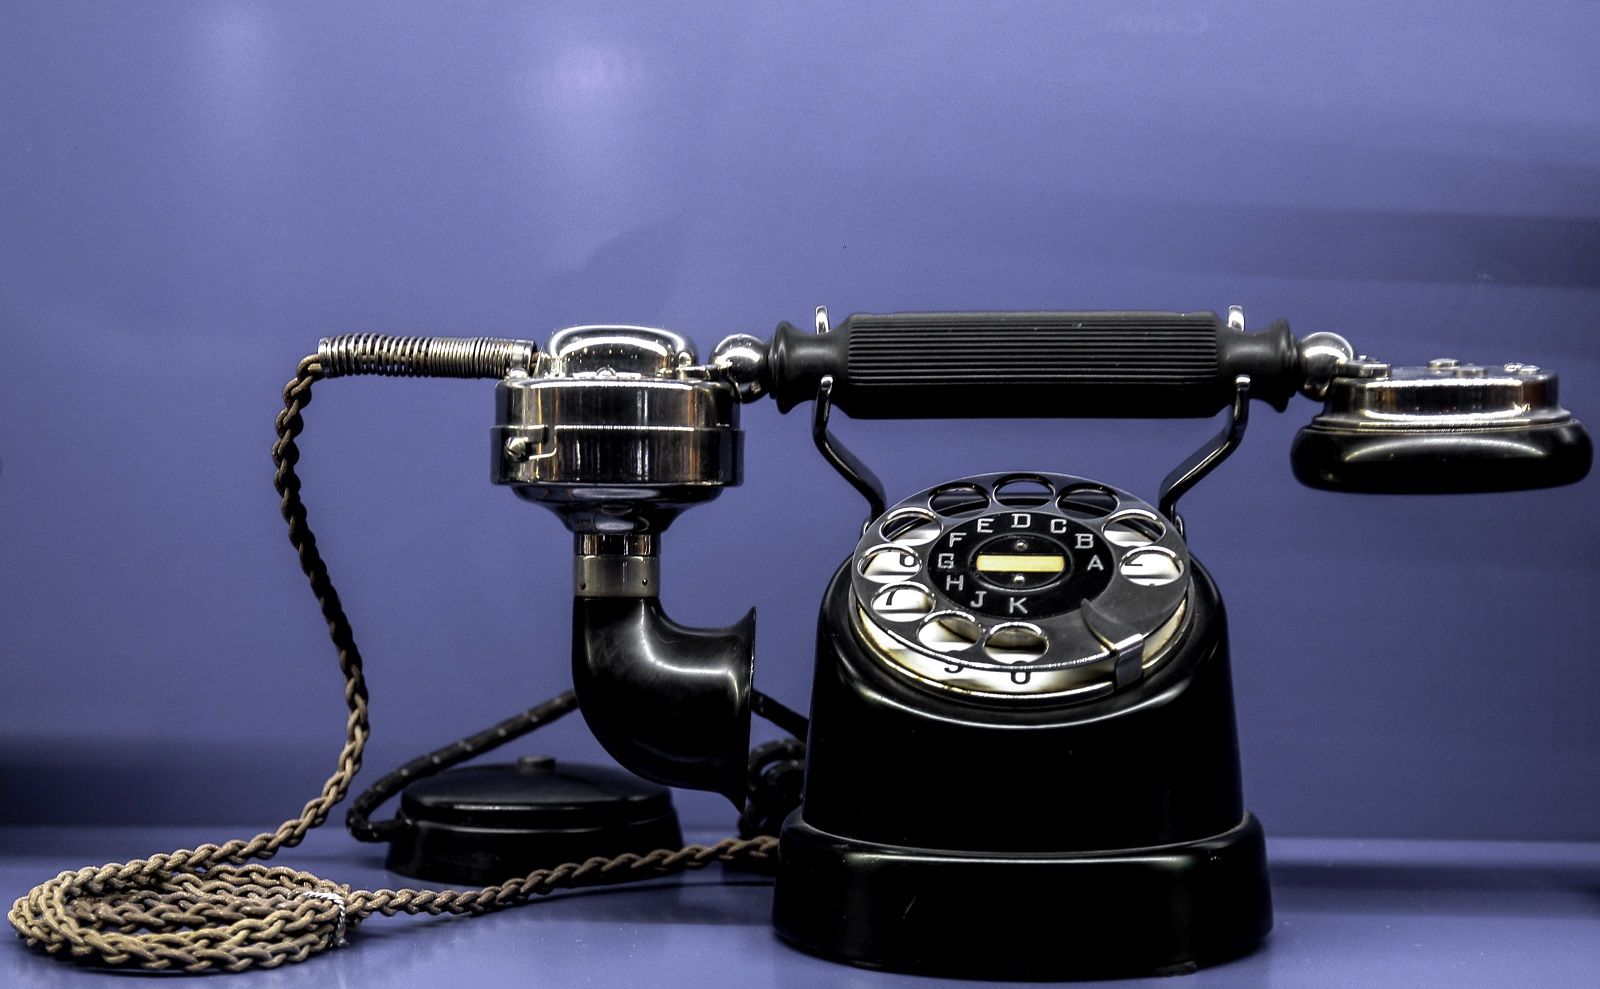 Rotary telephones and wired landlines